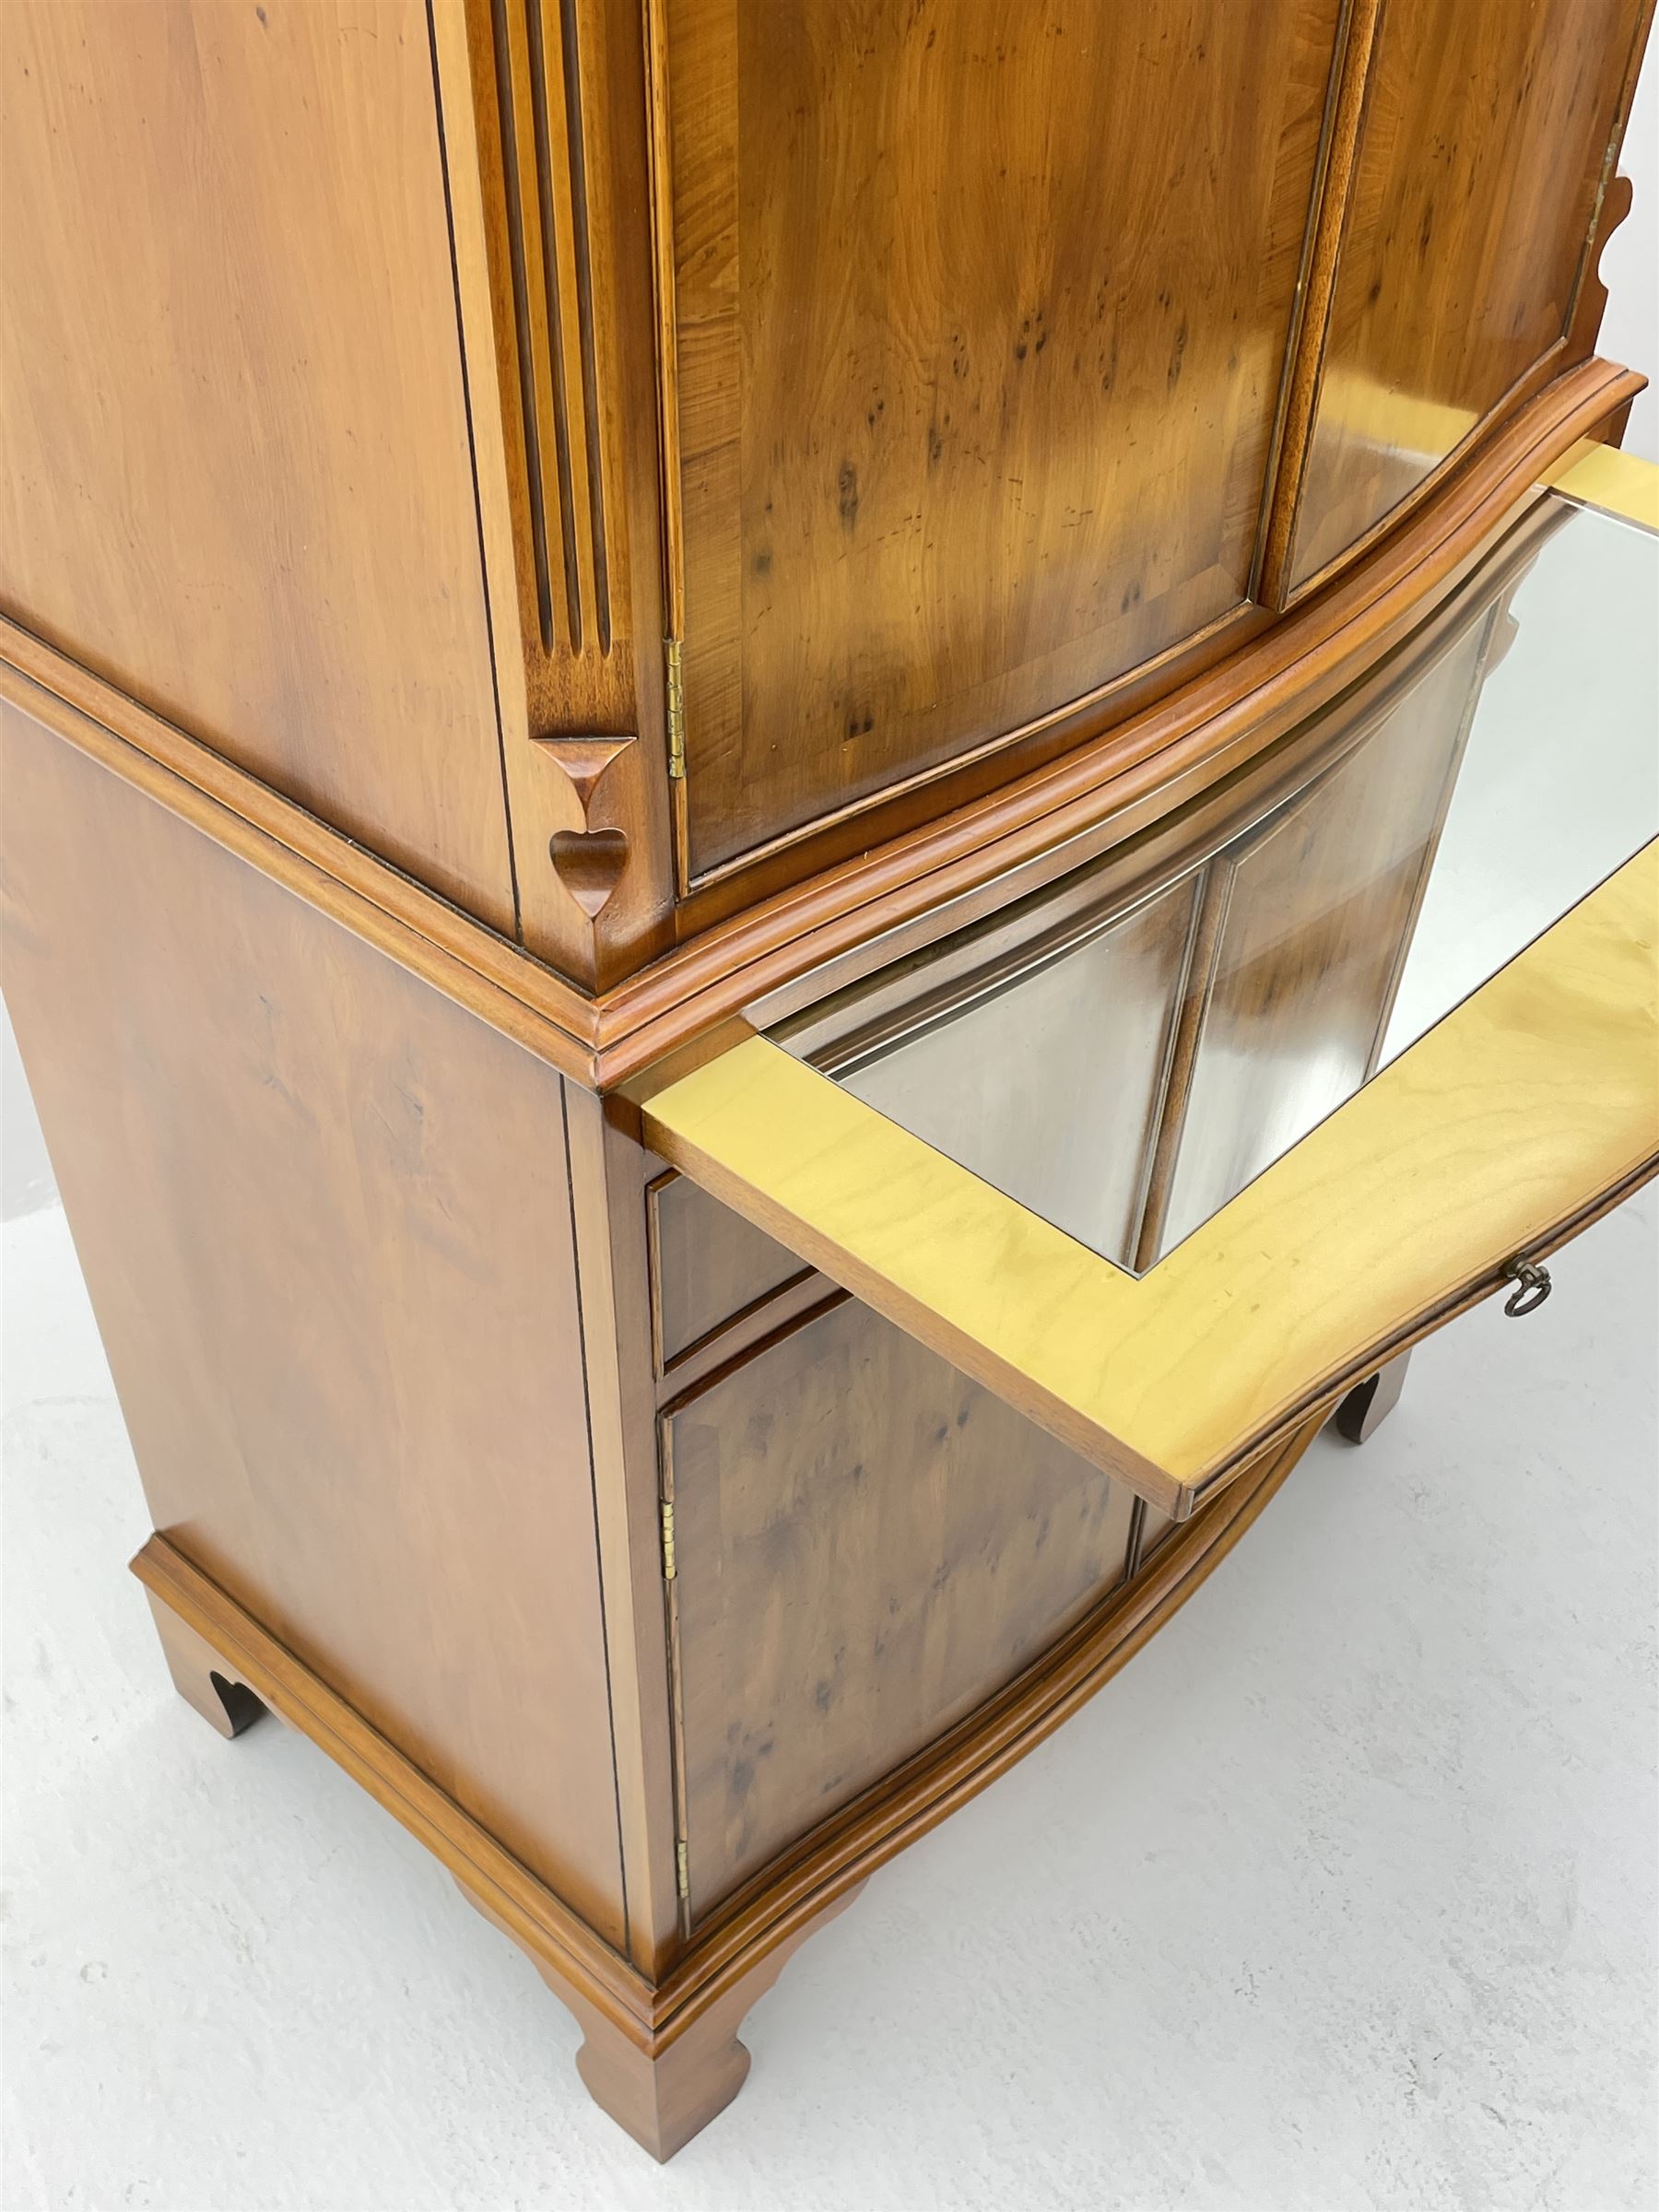 Bevan Funnell Reprodux yew wood cocktail drinks cabinet with illuminated interior - Image 4 of 4